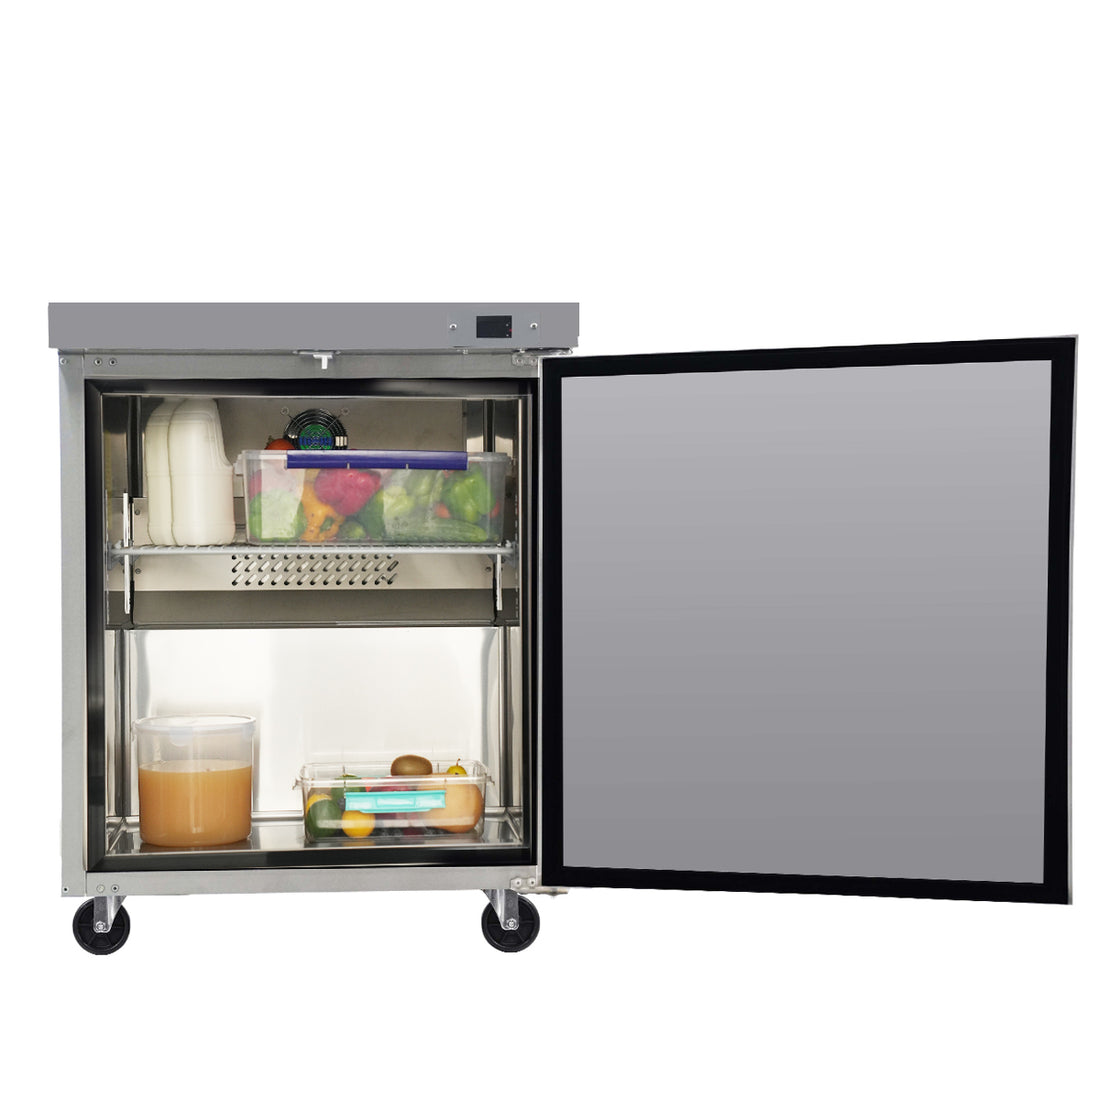 Orikool 29 IN Commercial Refrigerators, Undercounter silver-stainless steel